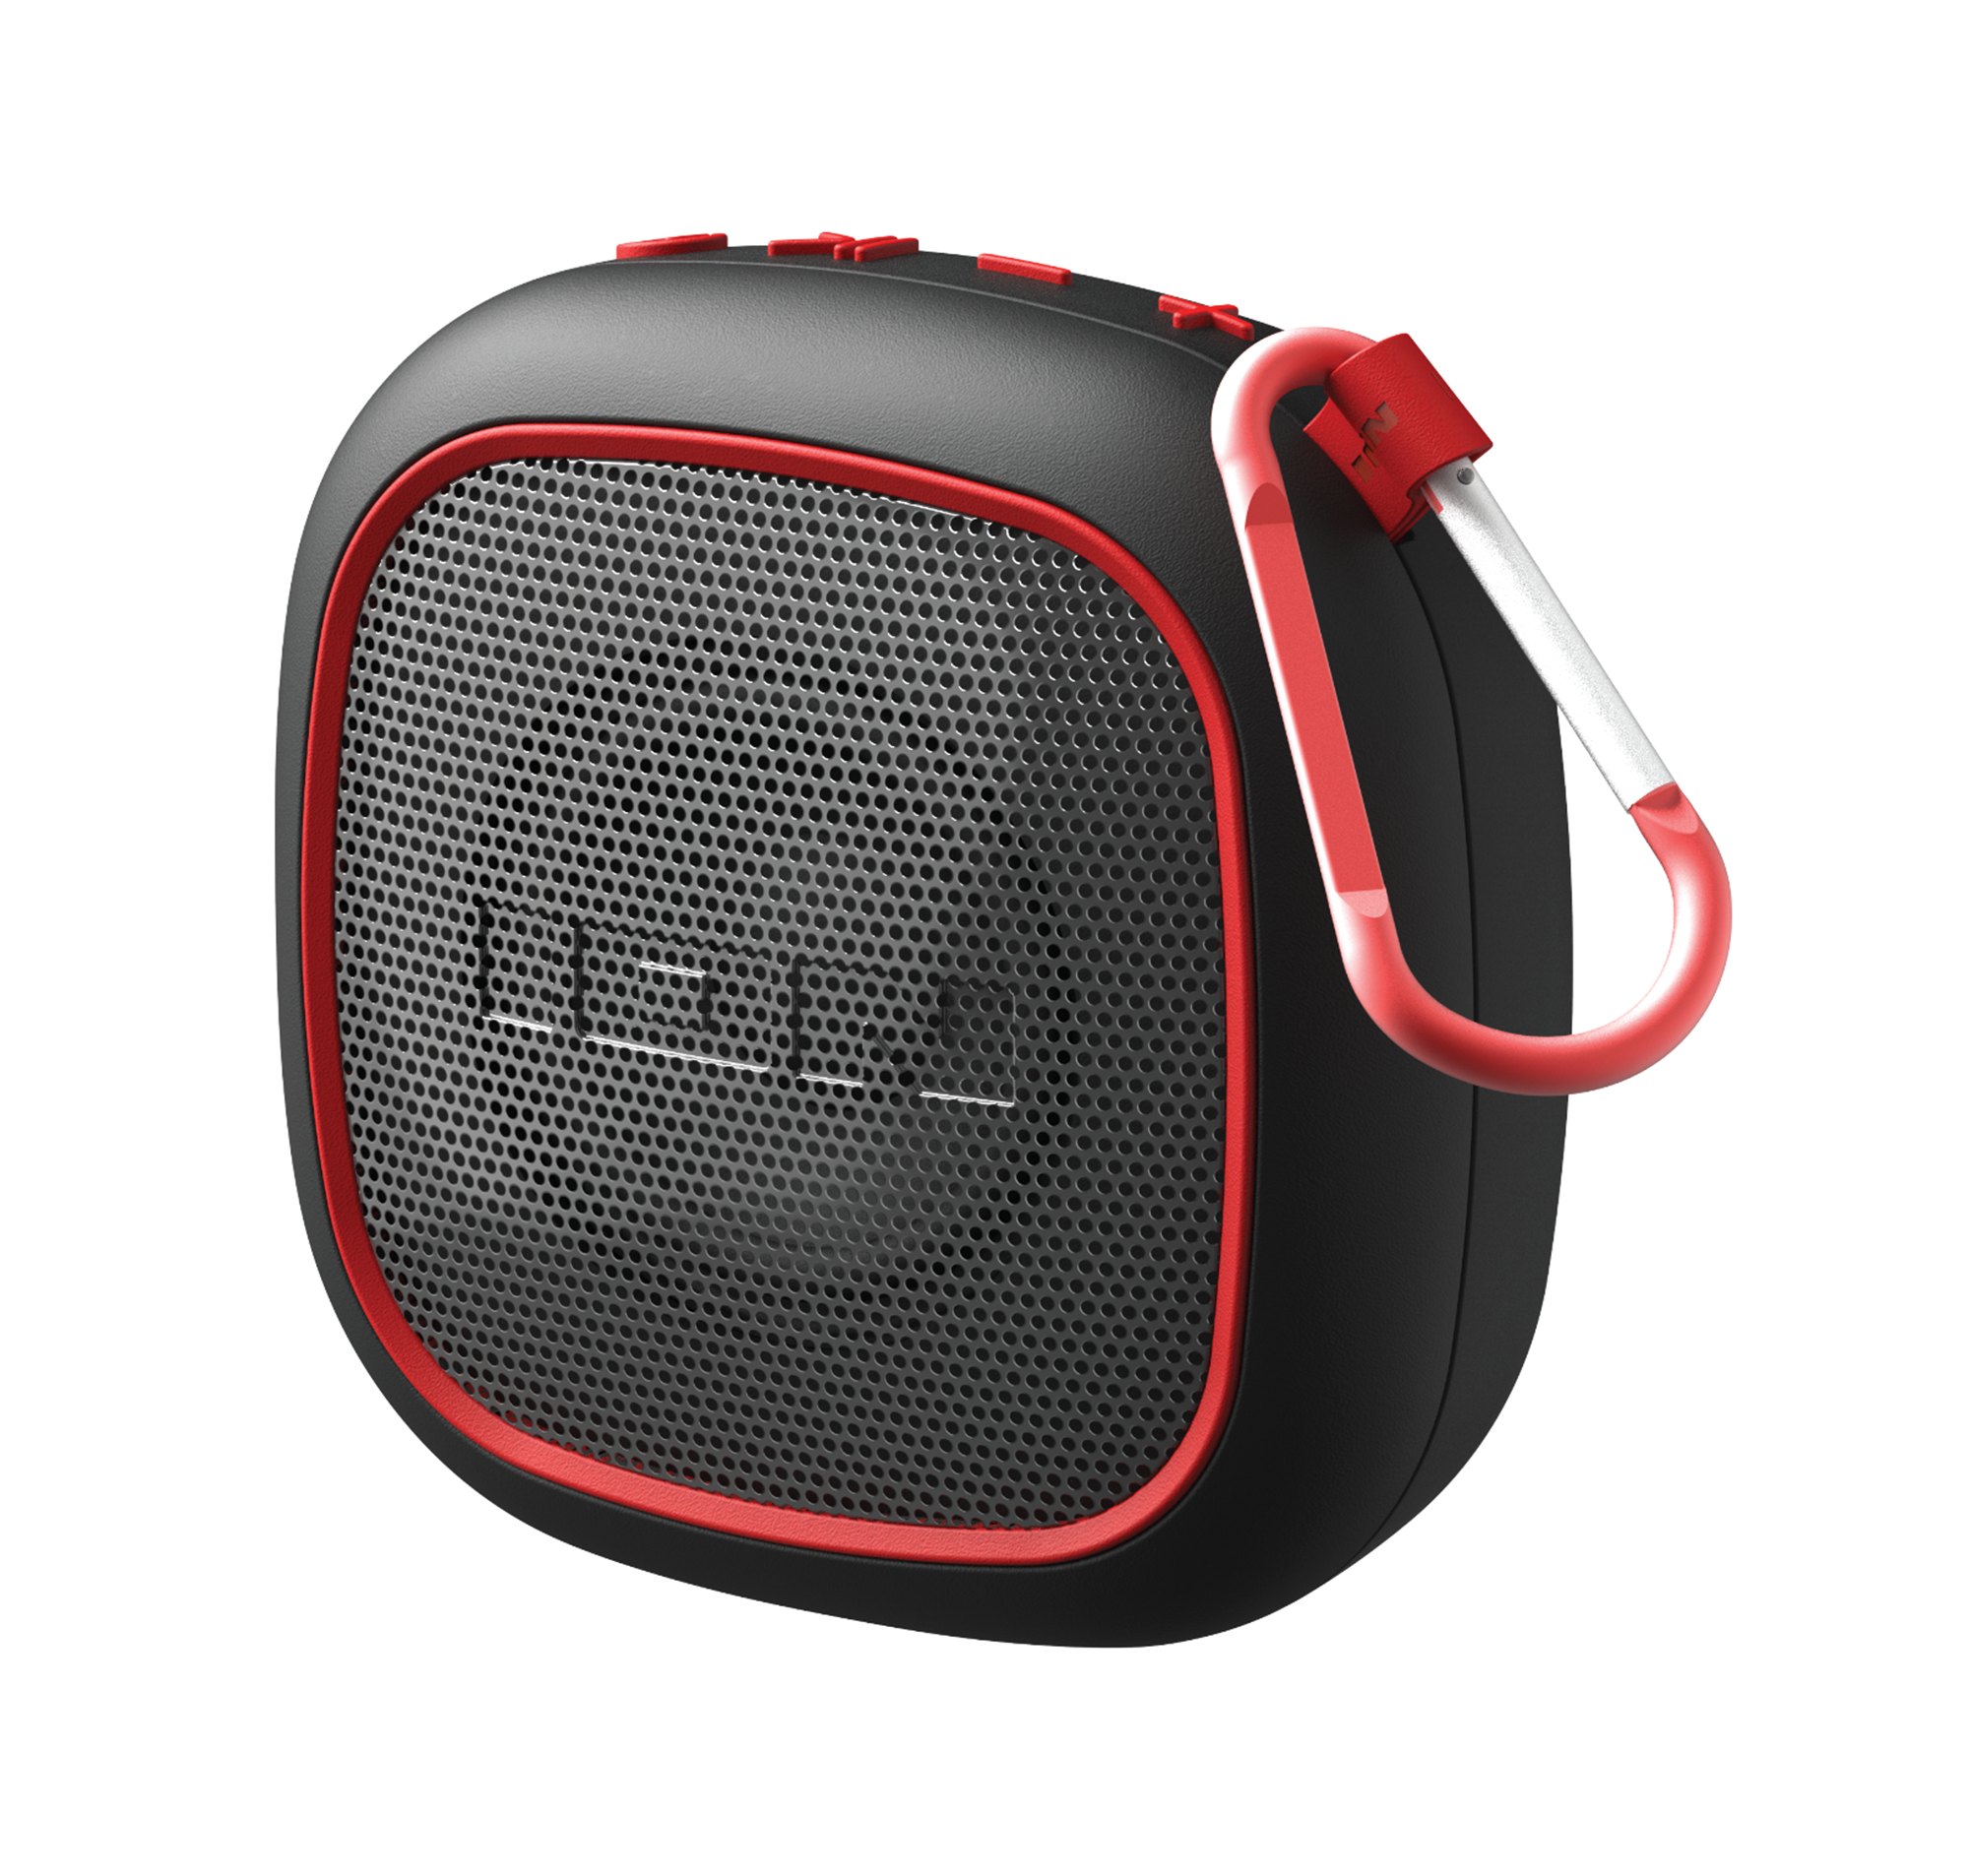 ION Audio Magnet Rocker Portable Bluetooth Speaker 2 Pack with Water Resistant, Black, iSP153 - image 3 of 12